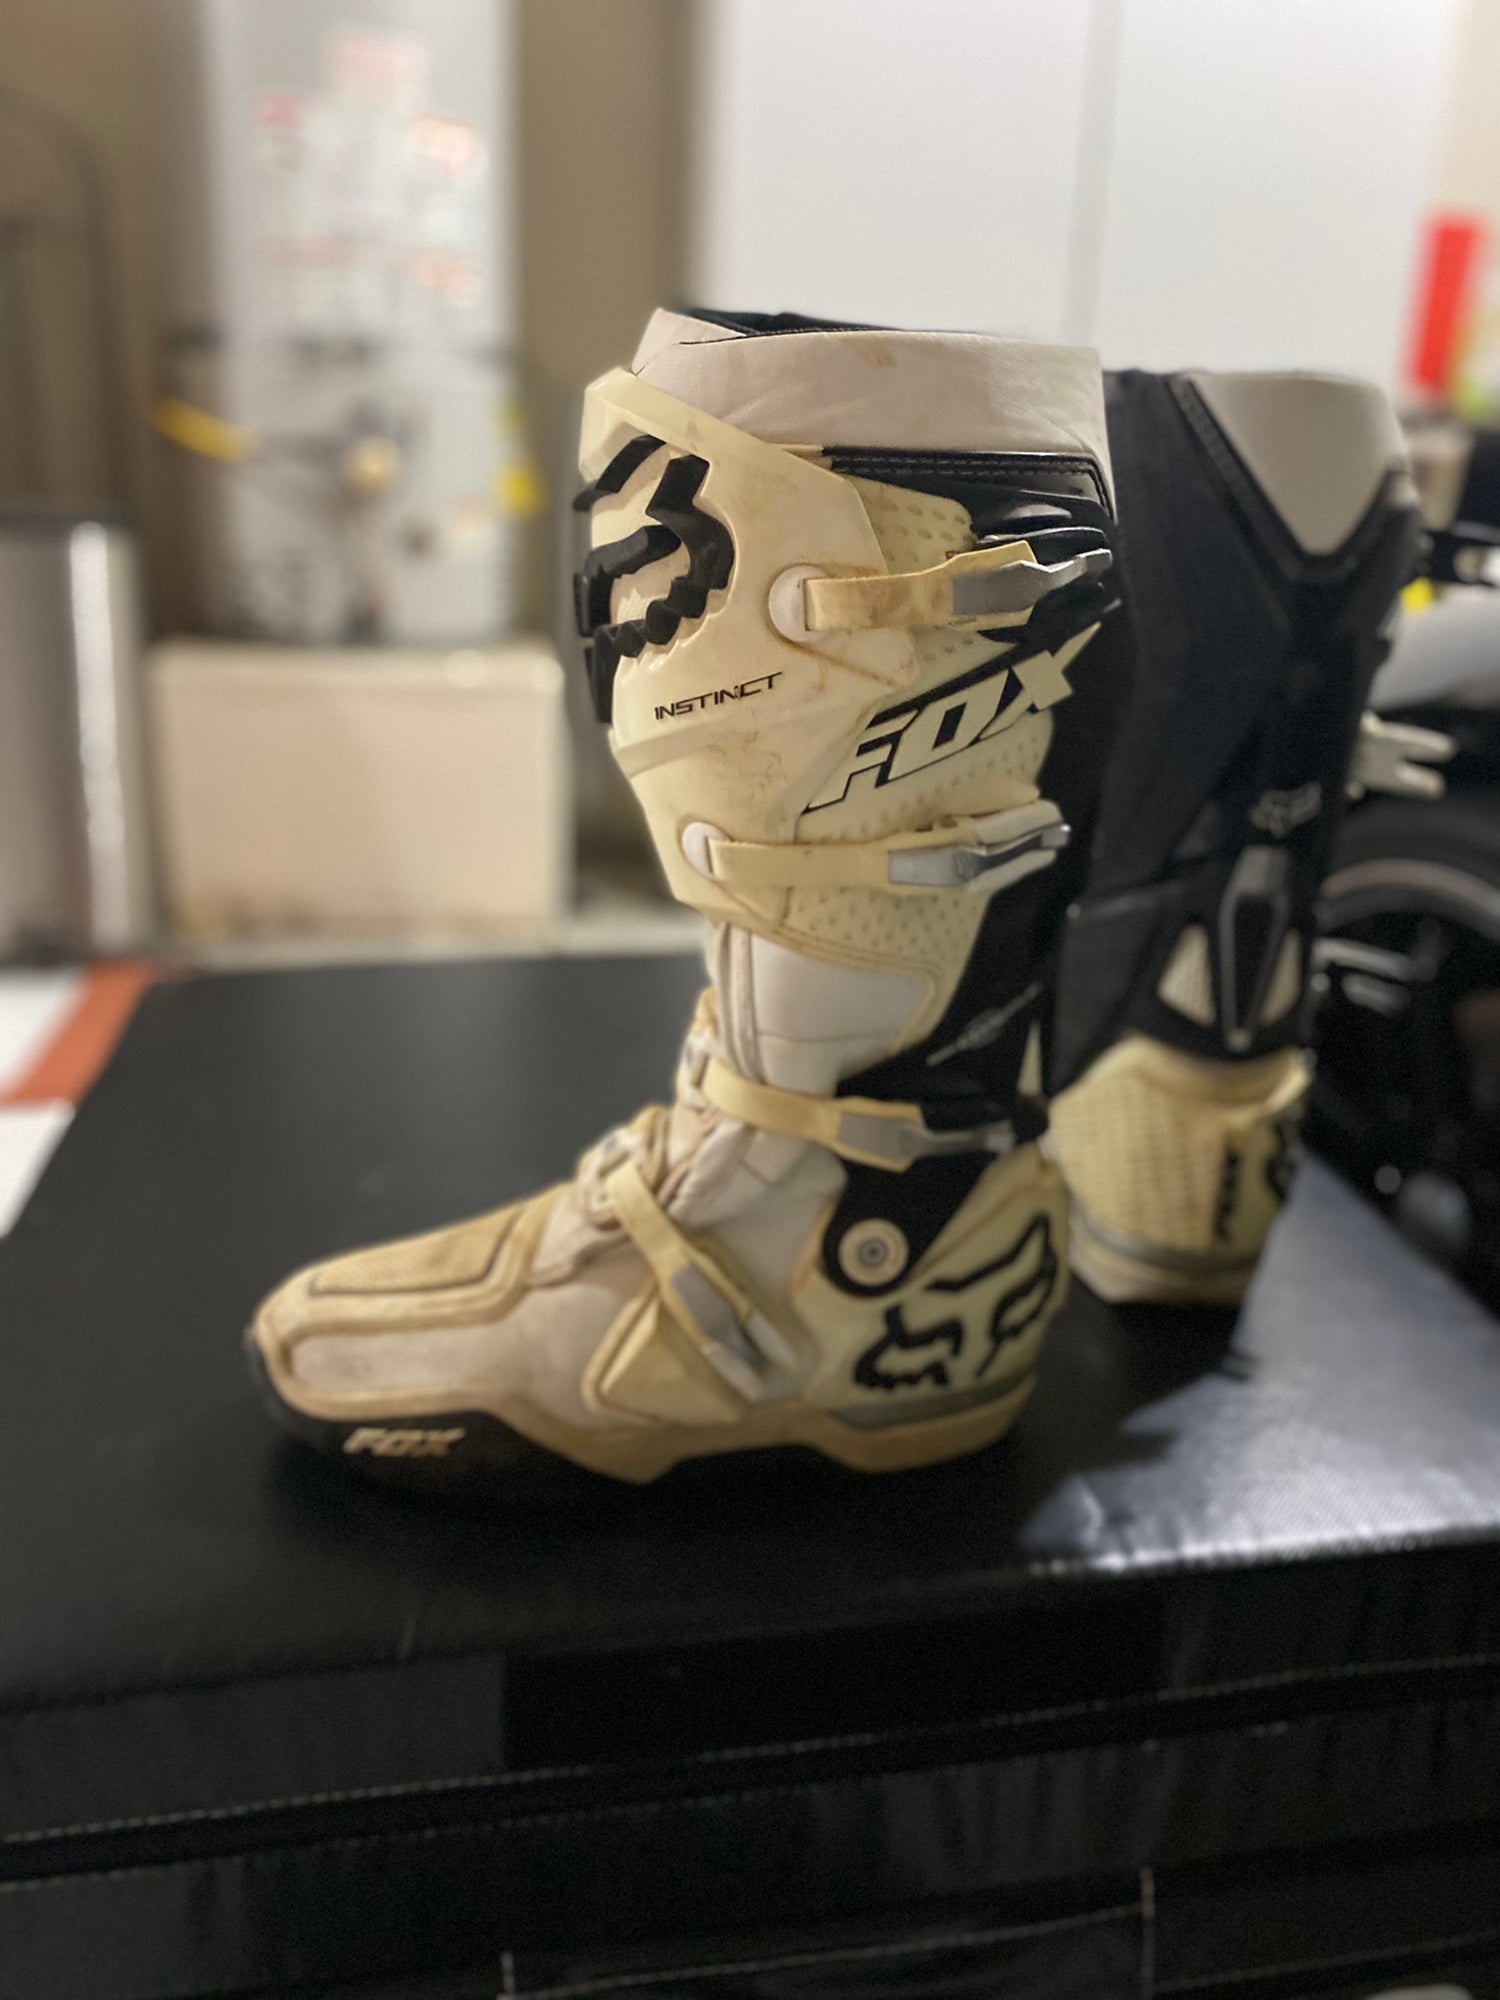 Fox Motocross Equipment for sale | New and Used on SidelineSwap